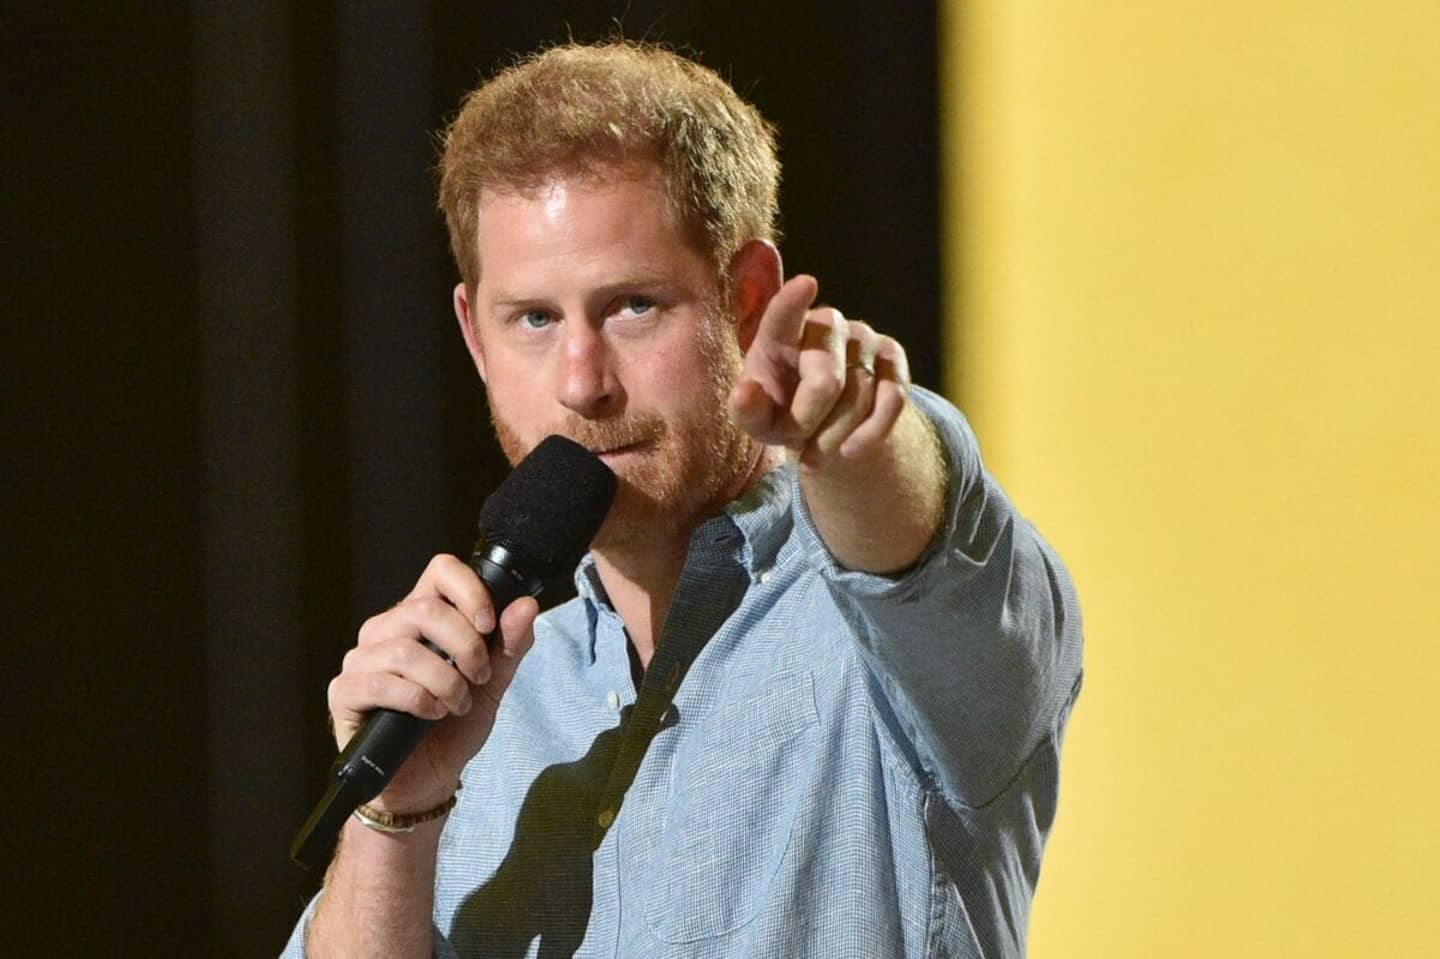 Two exclusive, solo interviews for Prince Harry